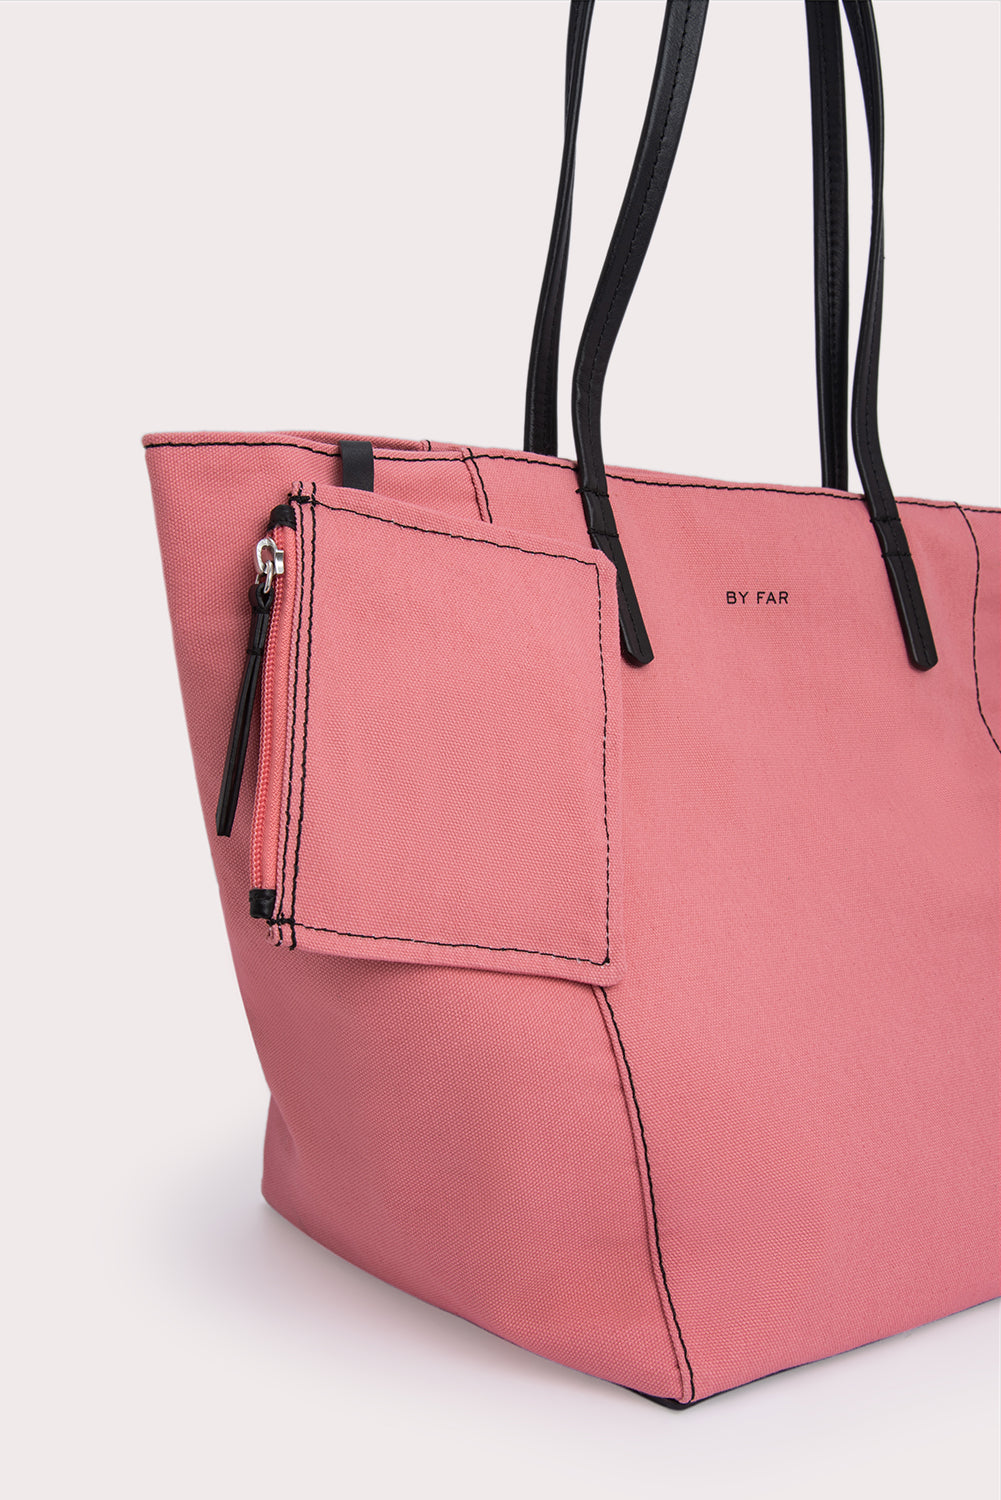 Club Tote Taffy Pink and Black Canvas and Nappa Leather